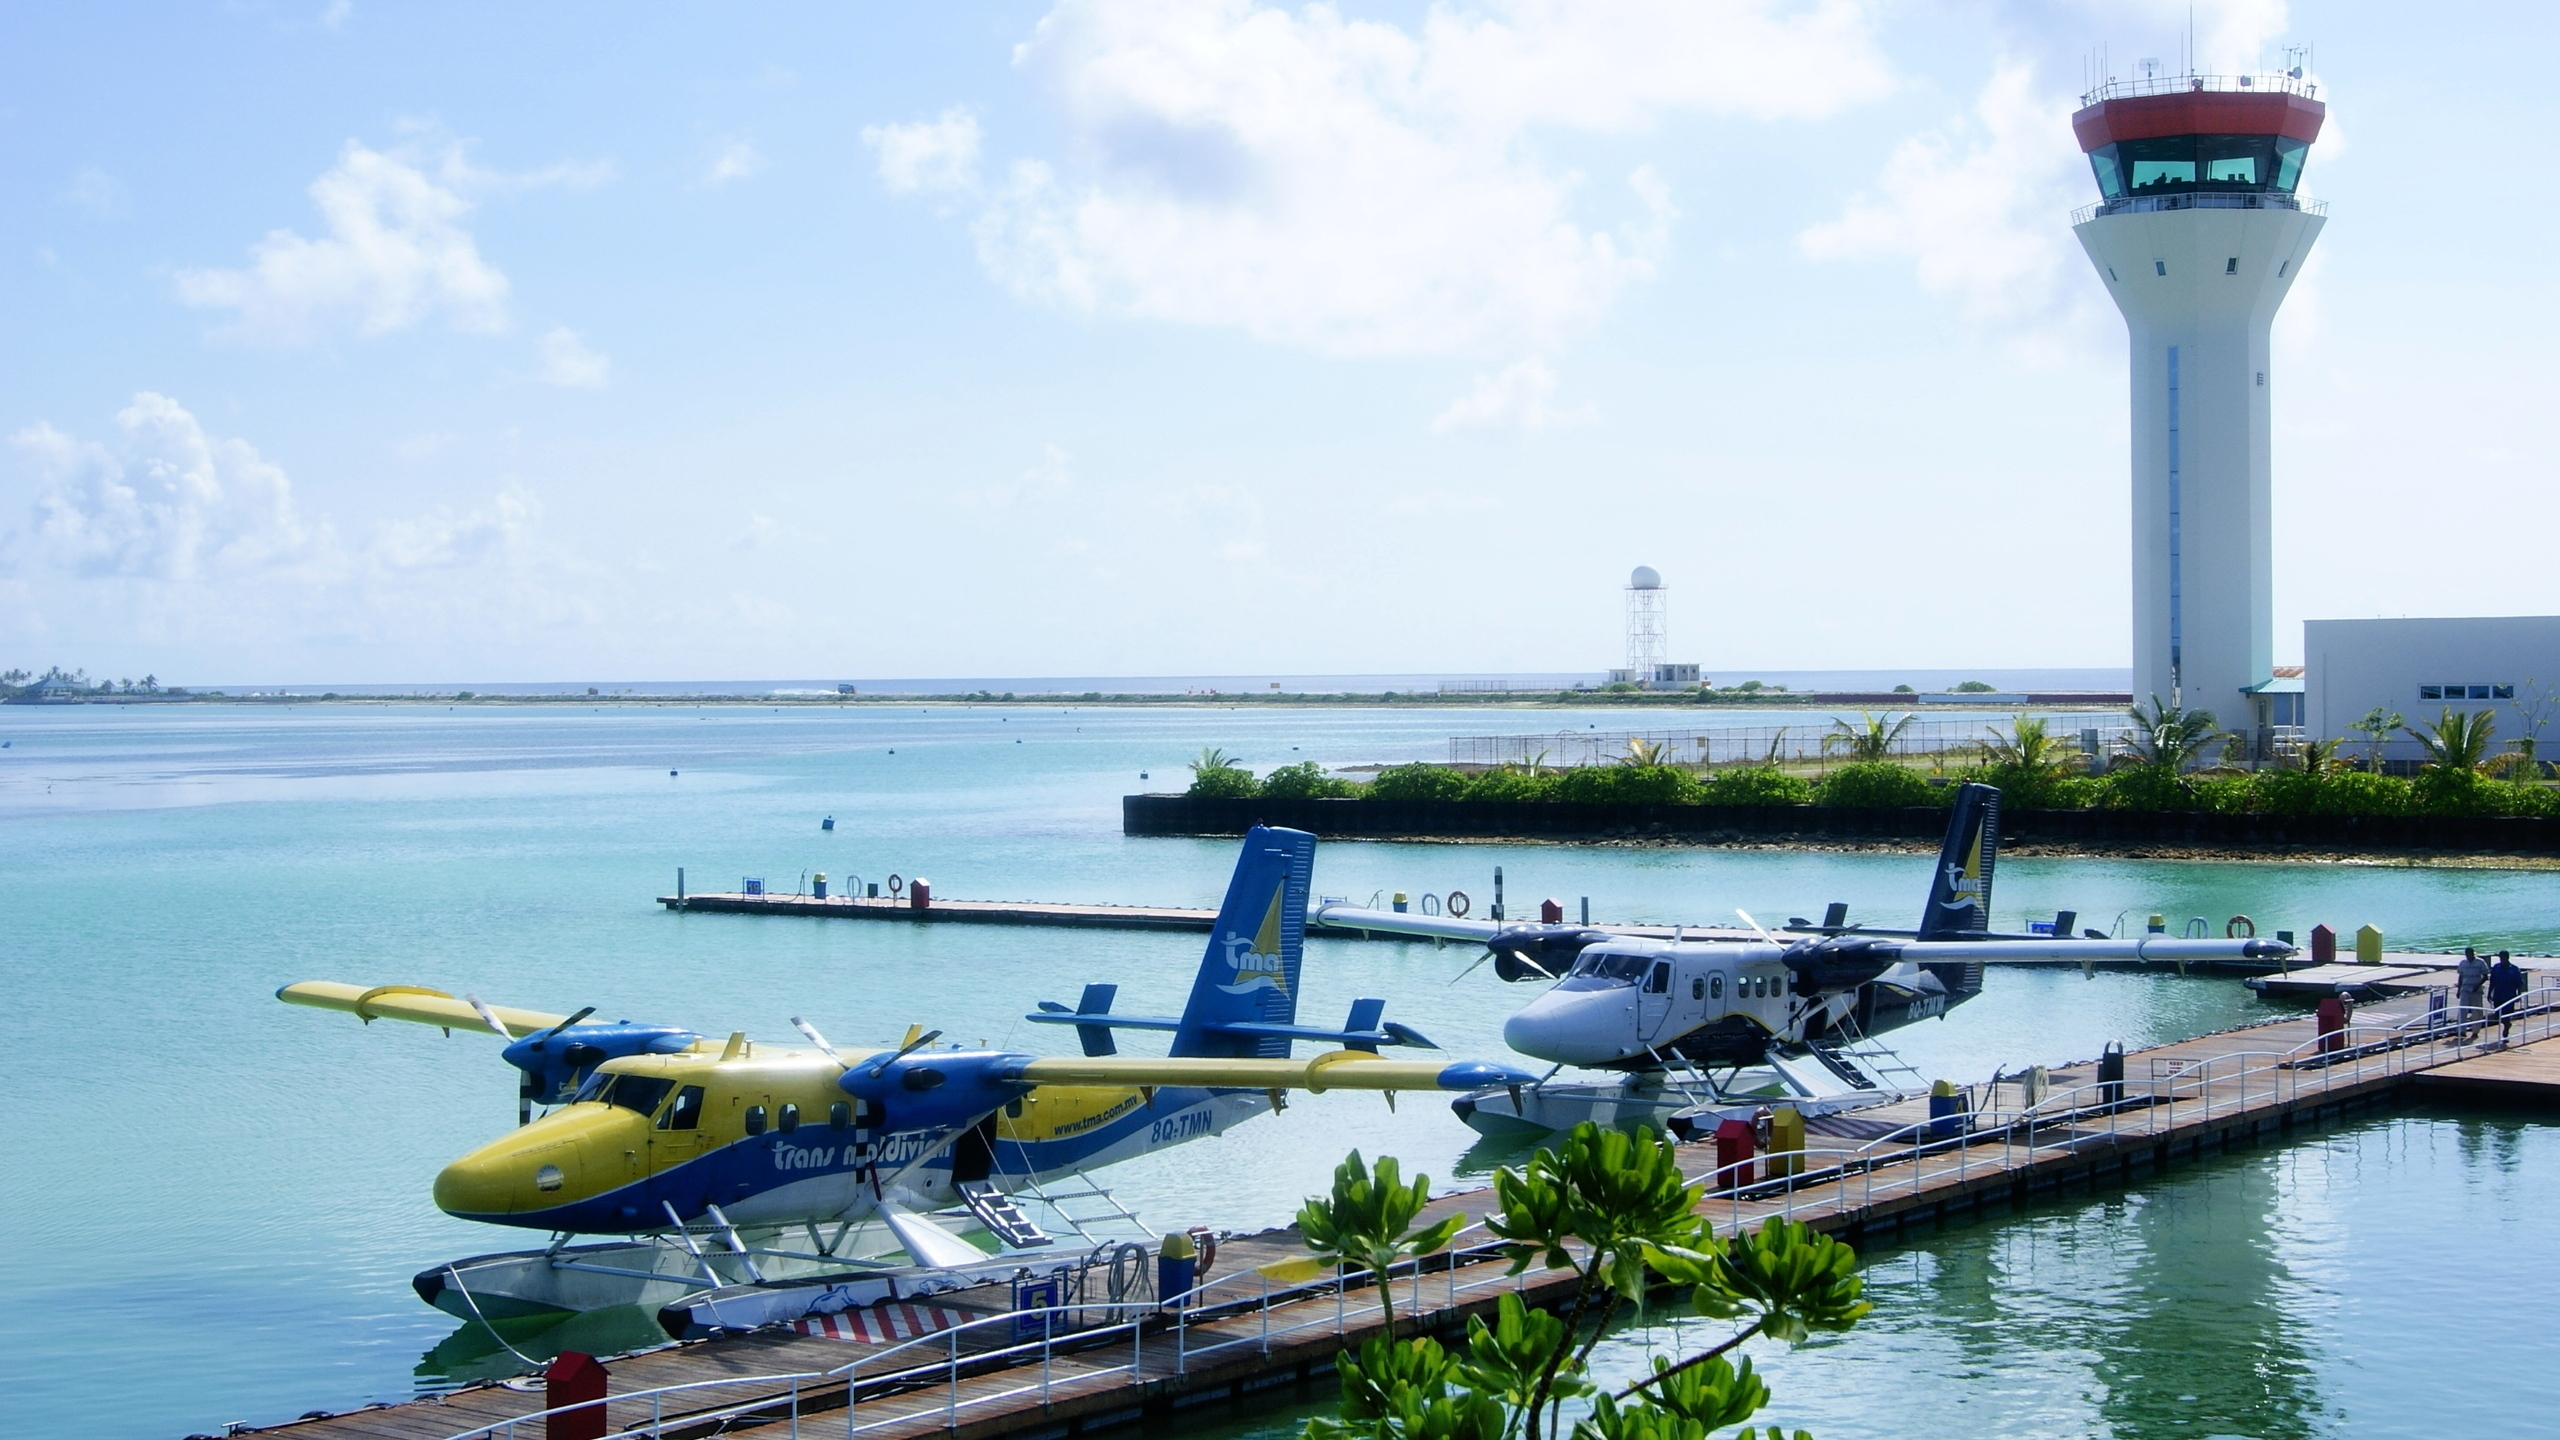 Maldives Airport for 2560x1440 HDTV resolution